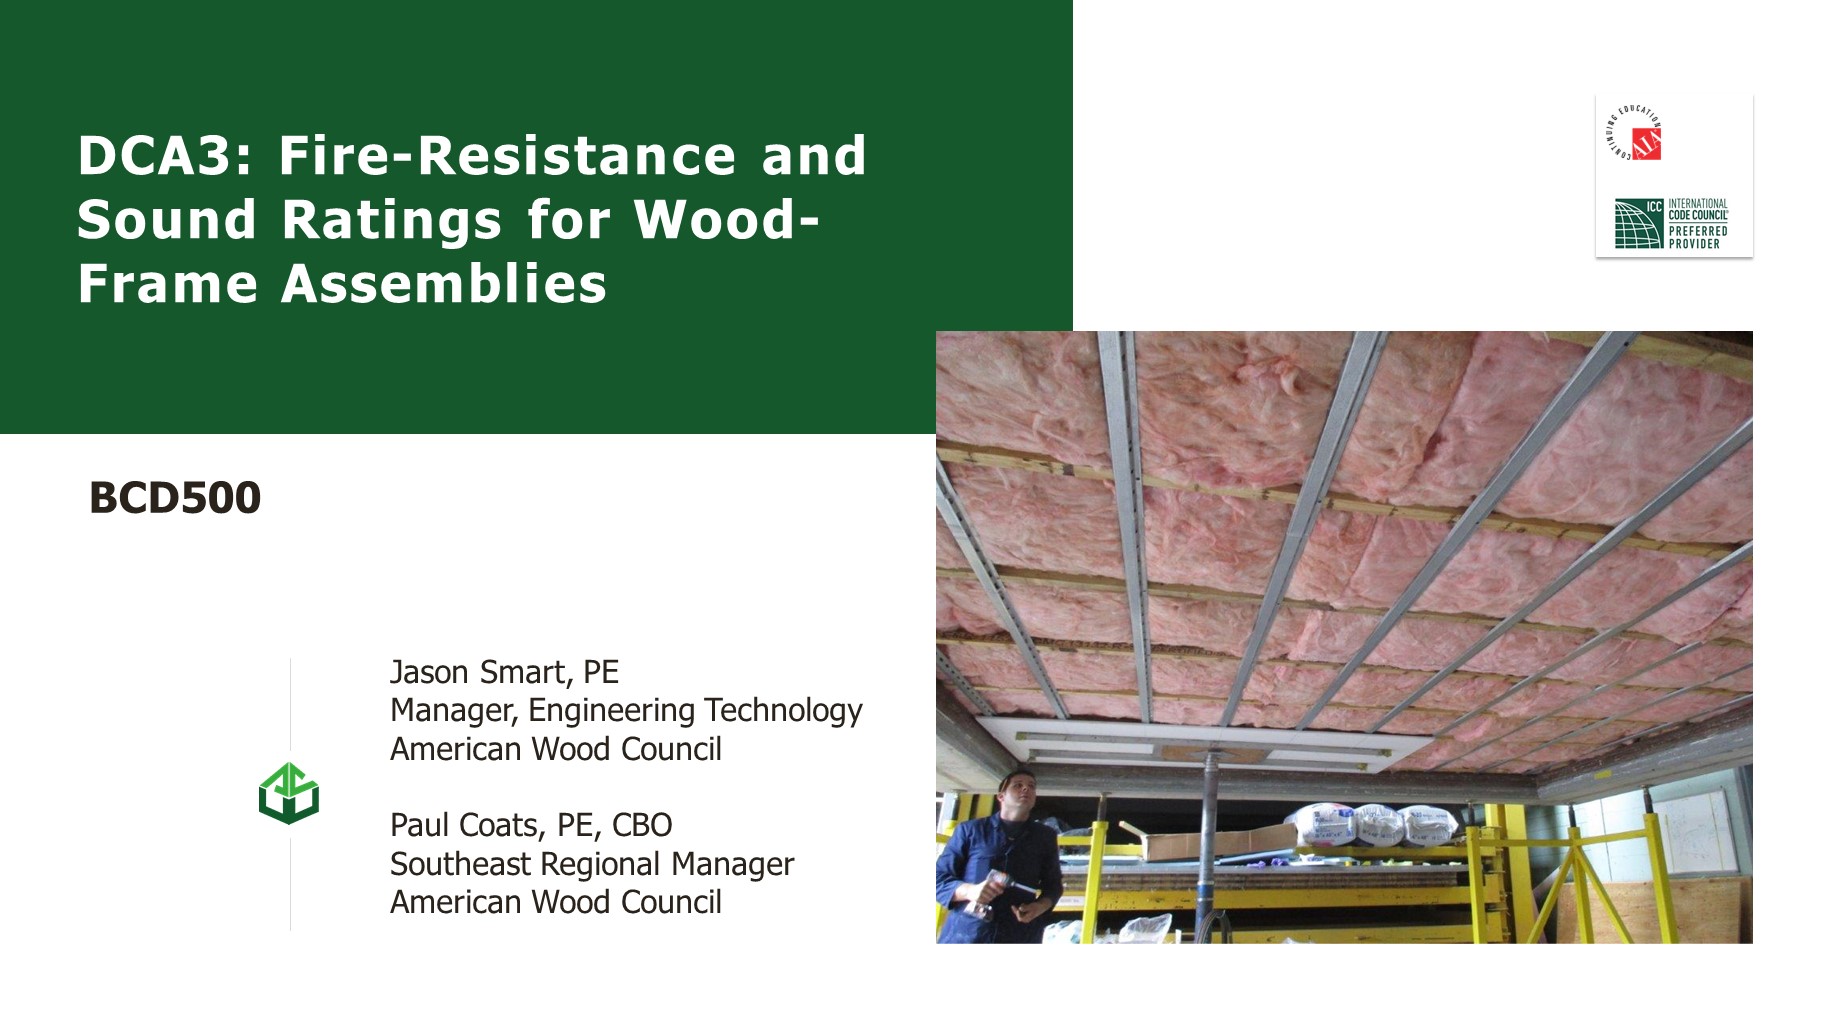 DCA3: Fire-Resistance and Sound Ratings for Wood-Frame Assemblies